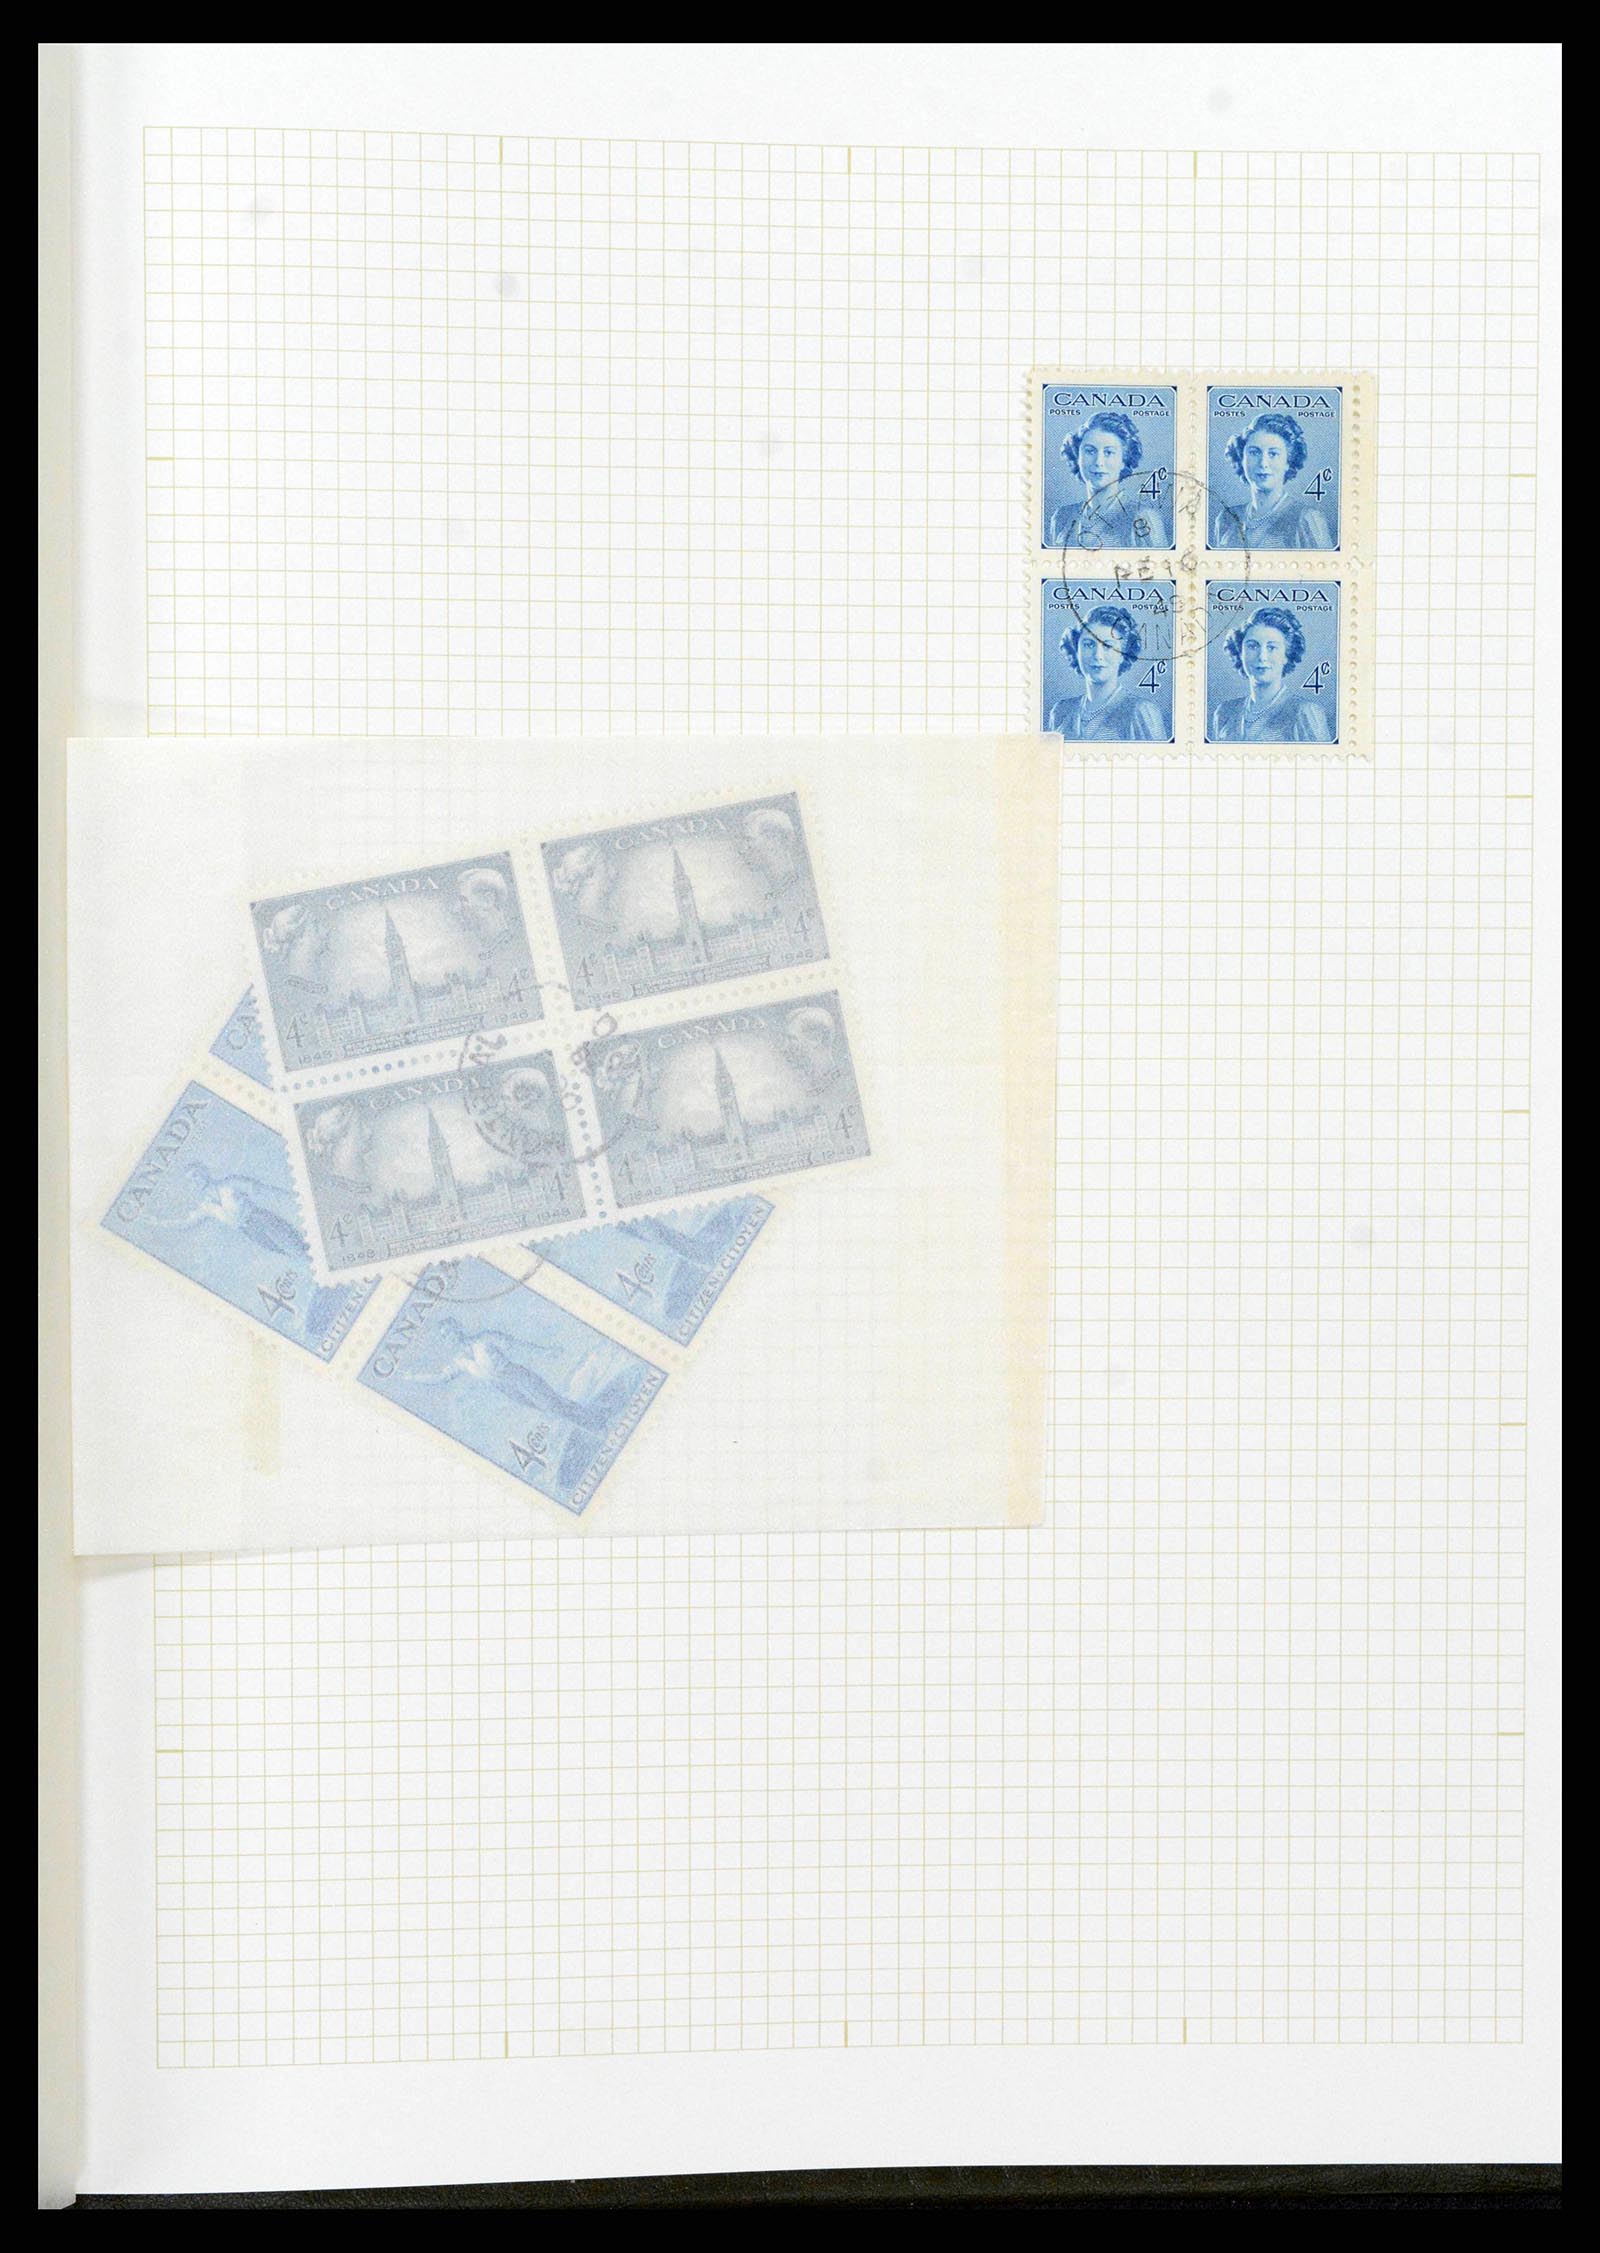 38293 0052 - Stamp collection 38293 Canada 1852-1967.